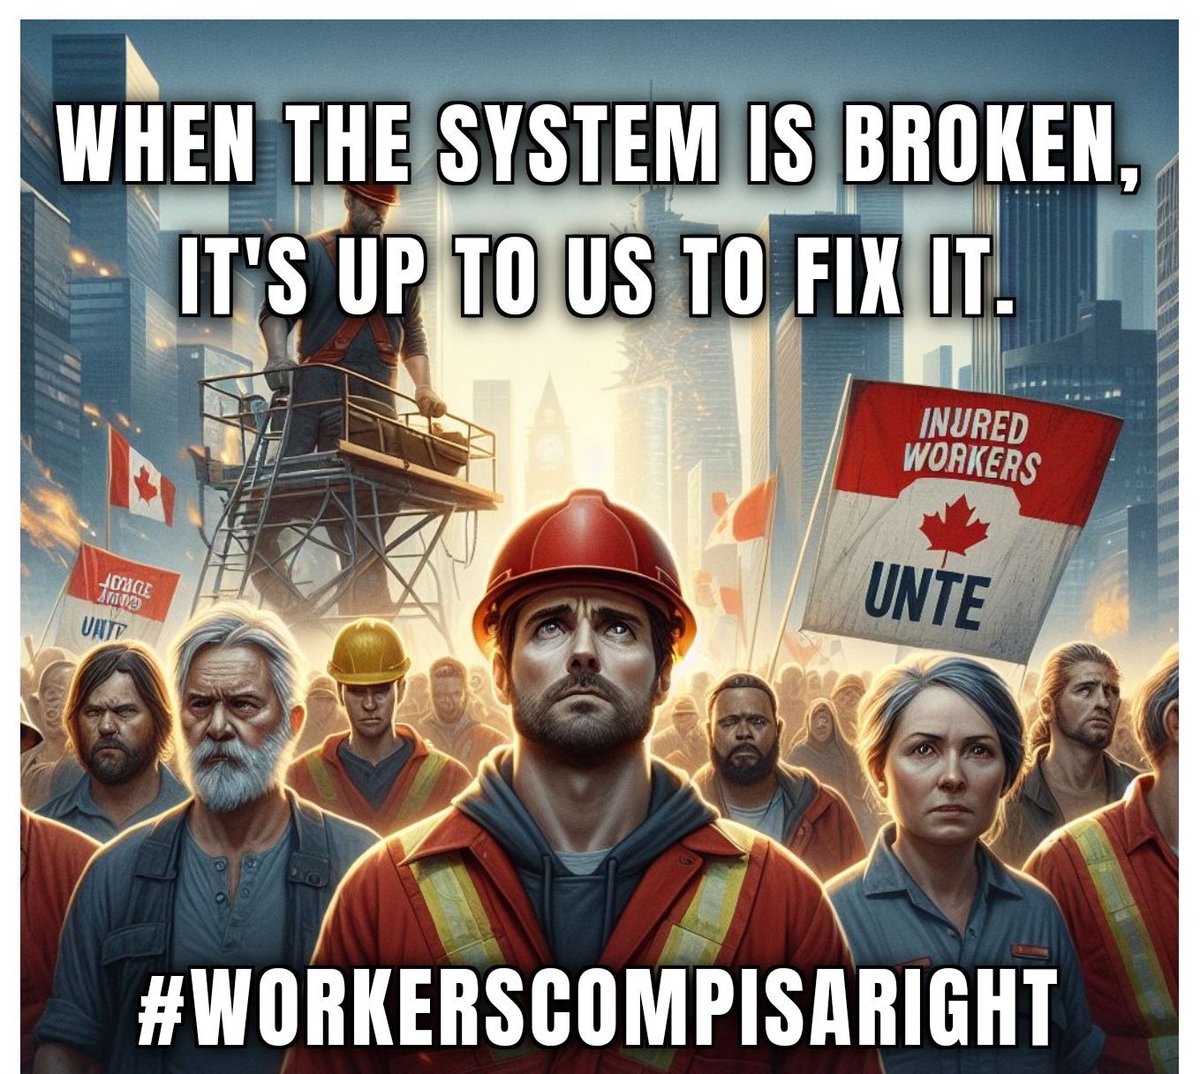 When the system is broken, it's up to us to fix it! #WorkersCompIsARight 
Let's raise our voices, demand change, and ensure that every worker receives the support and rights they deserve. Together, we can make a difference! #WorkersRights #FairTreatment